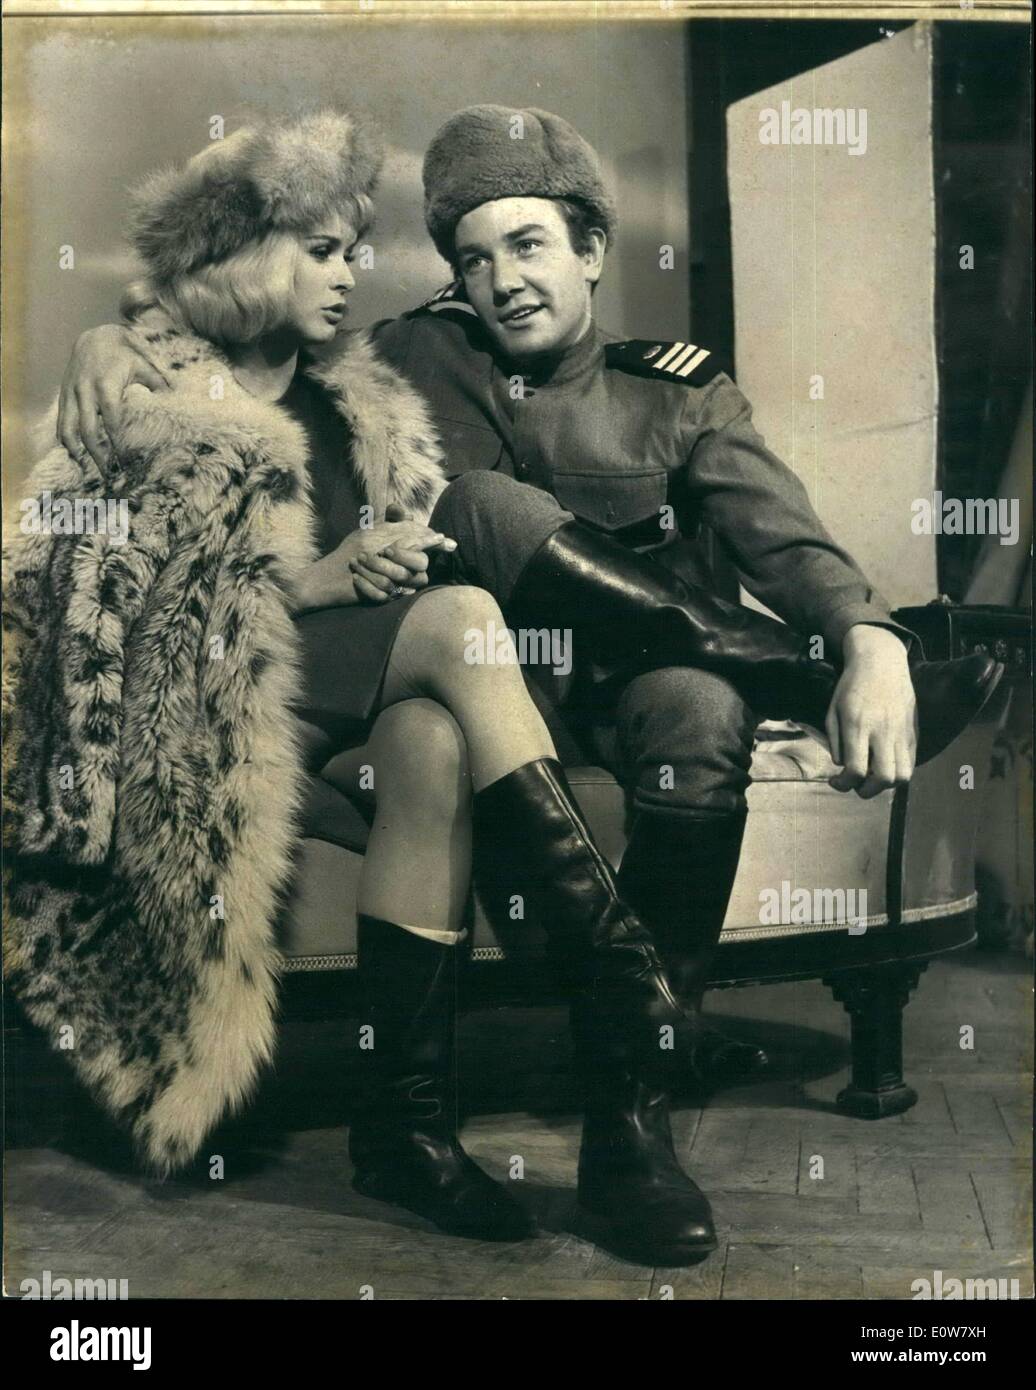 Jan. 01, 1962 - Albert Finney - Russian Soldier - In ''The Victors'' with German Co-star senta Berger. Screen star Albert Finney who made a great success in ''Saturday Night and Sunday Morning'' - ''Billy Lier'' - etc is taking on the role of a Russian soldier in the film ''The Victors'' a Shepperton. For the part Albert has to speak dialogue in Russian - for which he is having Russian lessons. he is to donate his salary for the part - to the Actors Orphanage. Photo Shows: Albert Finney - with Co-star Senta Berger - at Shepperton Studios this afternoon Senate Berger comes from Germany. Stock Photo